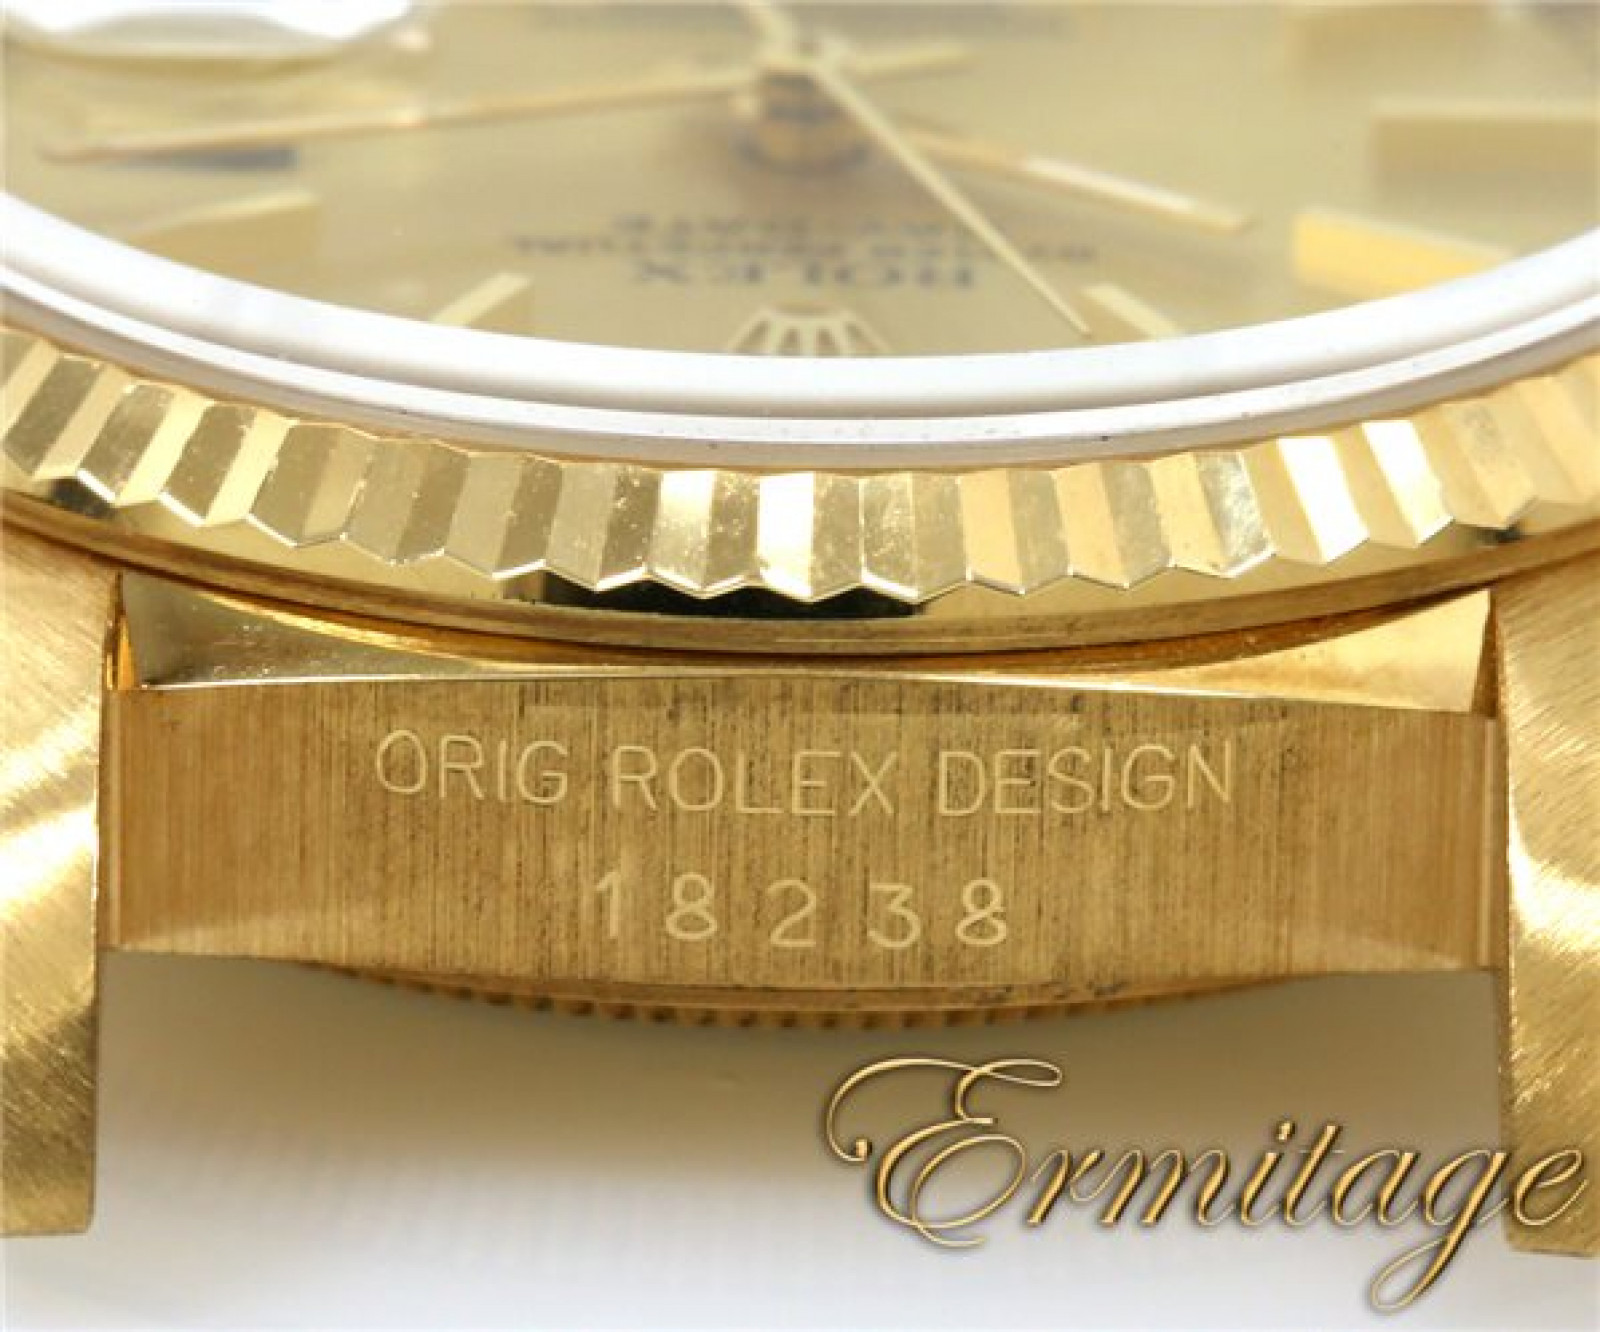 Pre-Owned Rolex Day-Date 18233